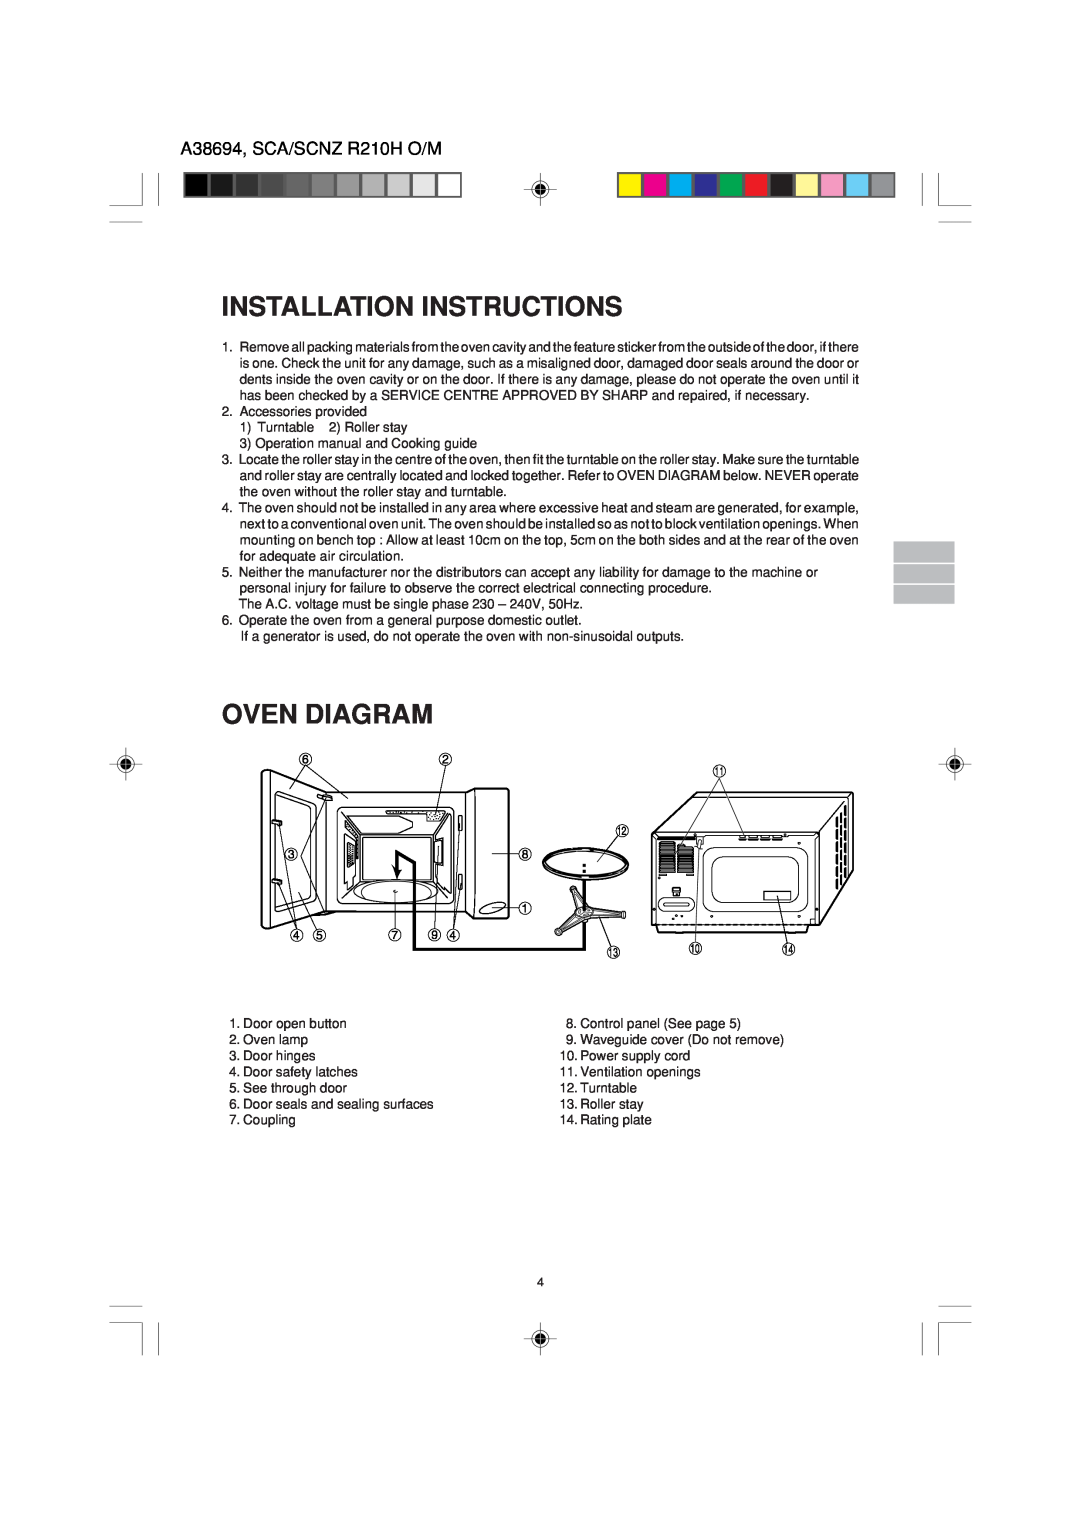 Sharp R-210H operation manual Installation Instructions, Oven Diagram, A38694, SCA/SCNZ R210H O/M 